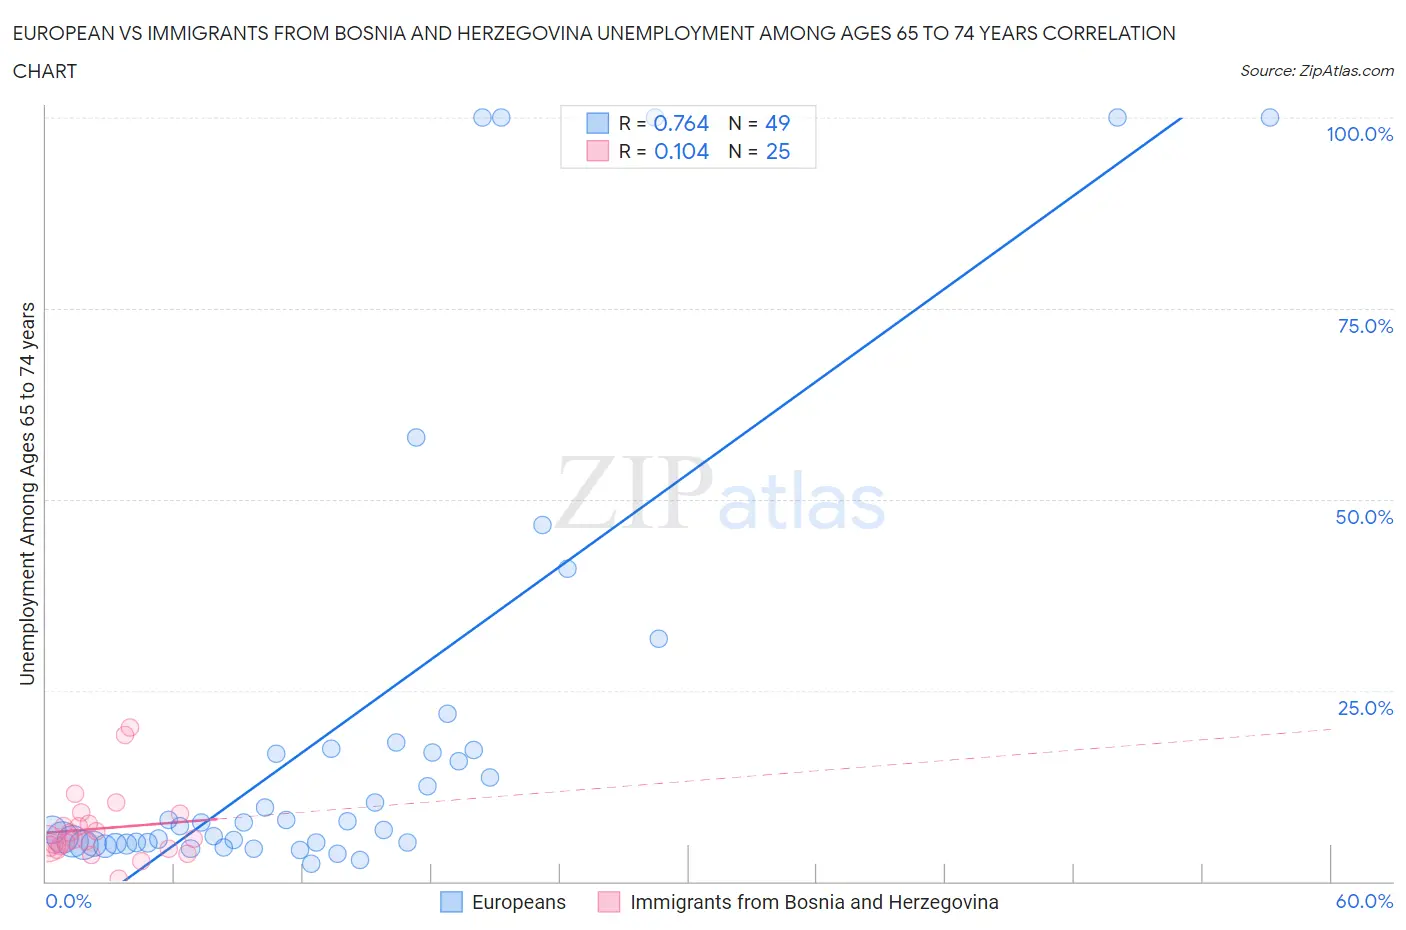 European vs Immigrants from Bosnia and Herzegovina Unemployment Among Ages 65 to 74 years